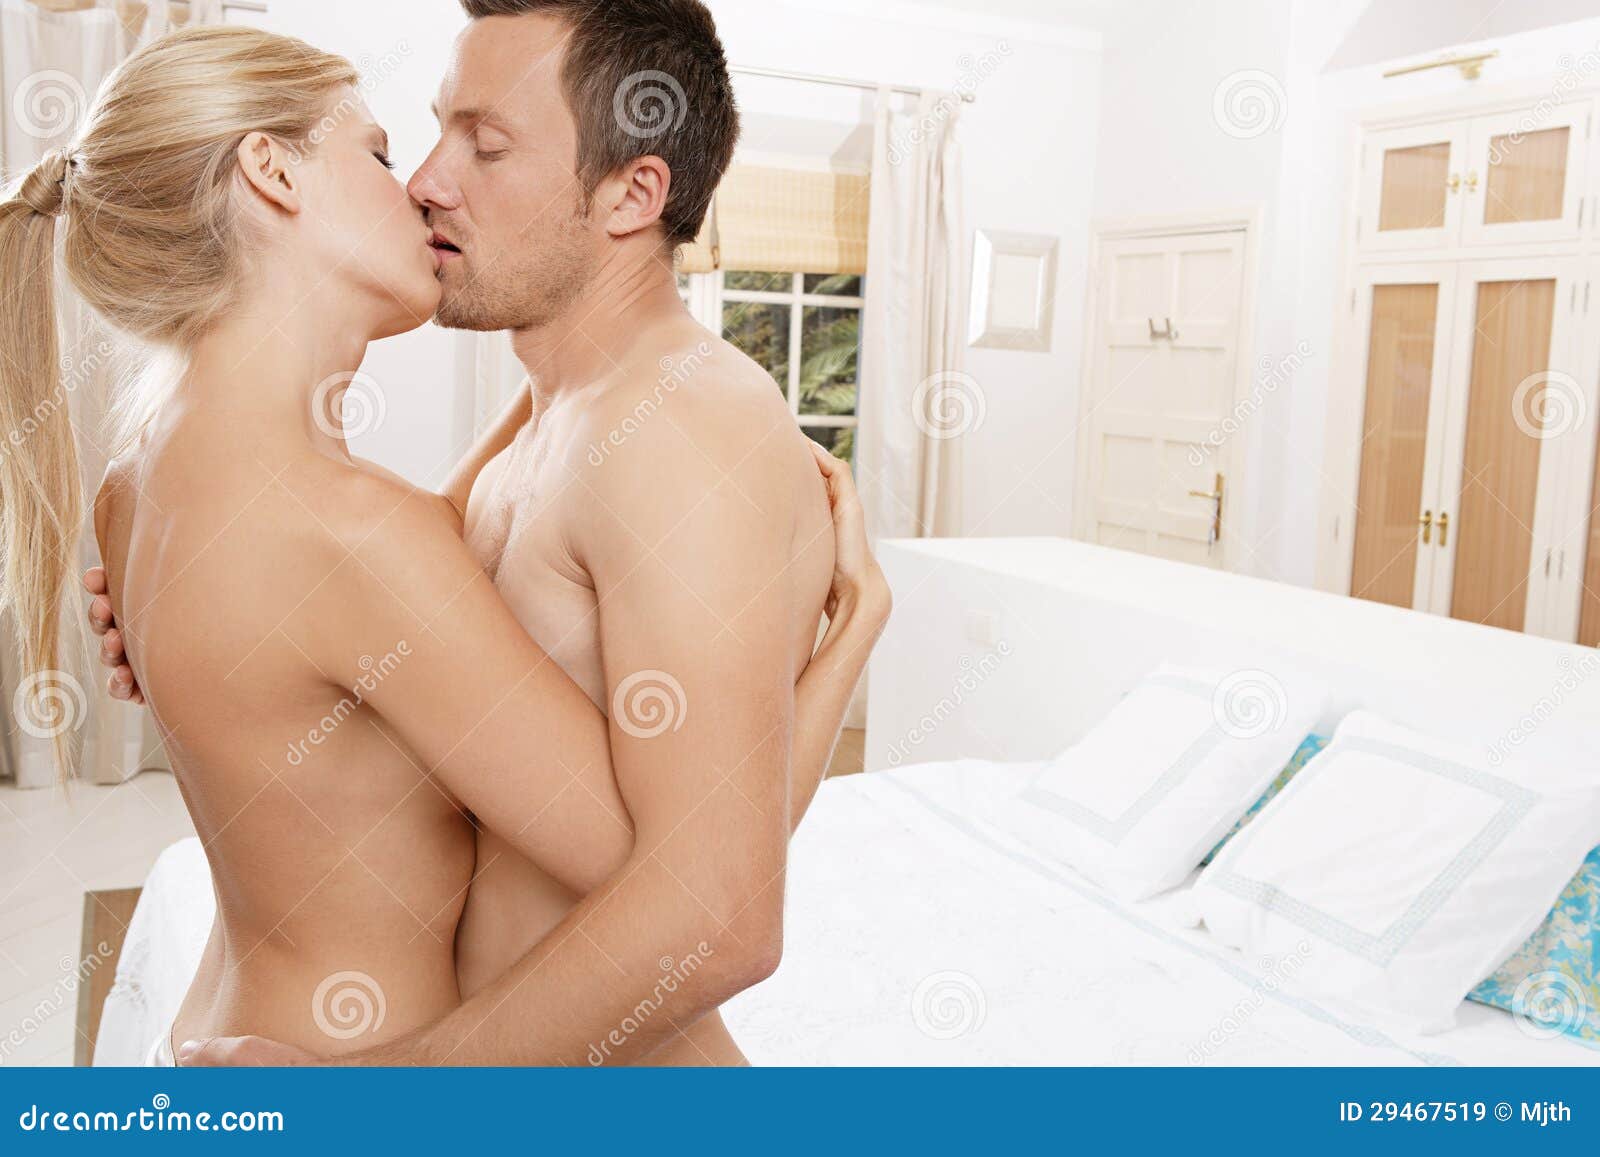 Nude couple hugging and kissing